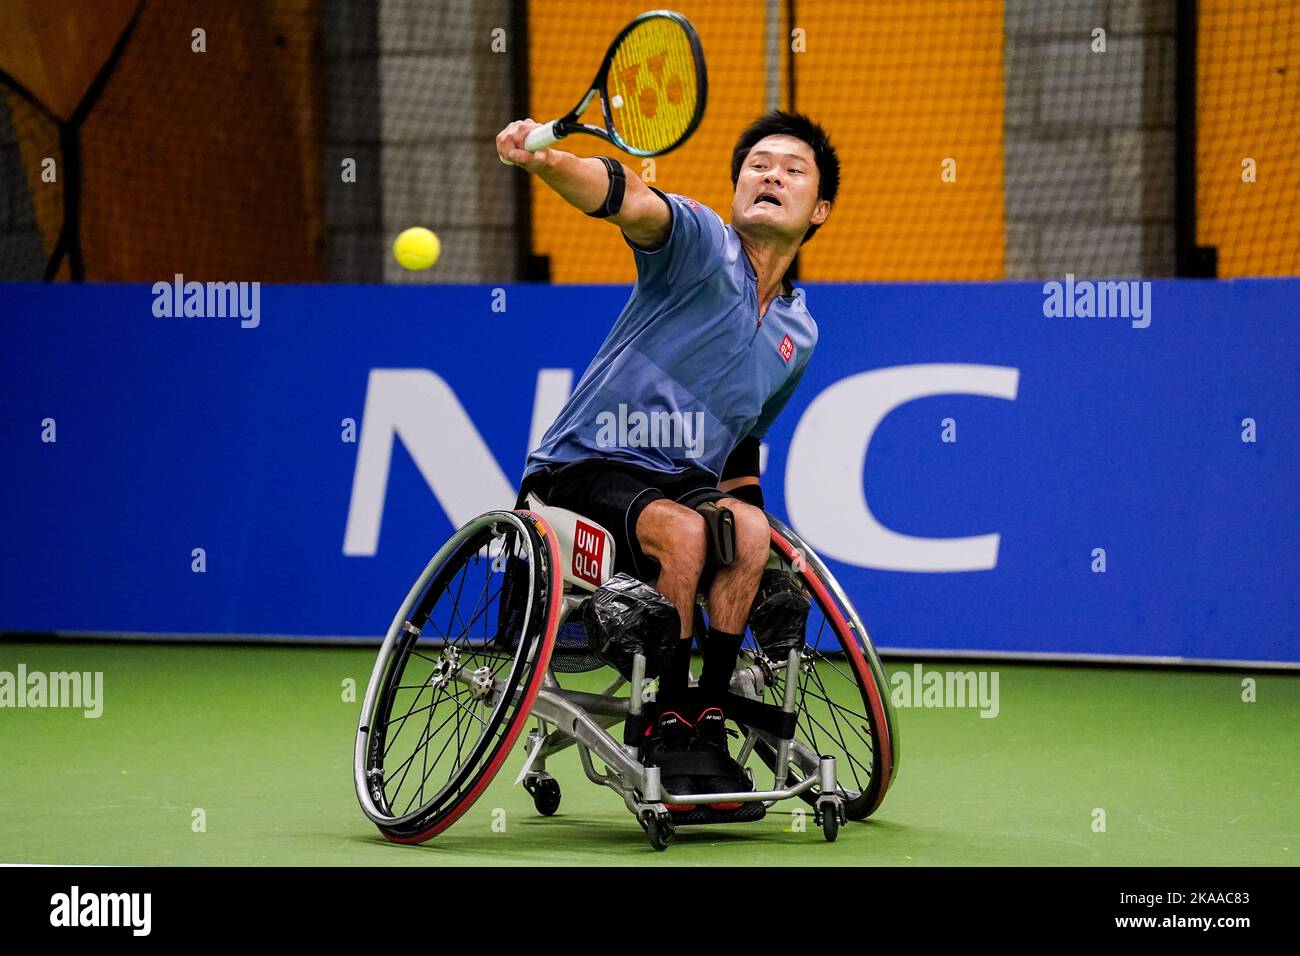 OSS, NETHERLANDS - NOVEMBER 1: Shingo Kunieda of Japan plays a backhand in his match against Tom Egberink of the Netherlands during Day 3 of the 2022 ITF Wheelchair Tennis Masters at Sportcentrum de Rusheuvel on November 1, 2022 in Oss, Netherlands (Photo by Rene Nijhuis/Orange Pictures) Stock Photo